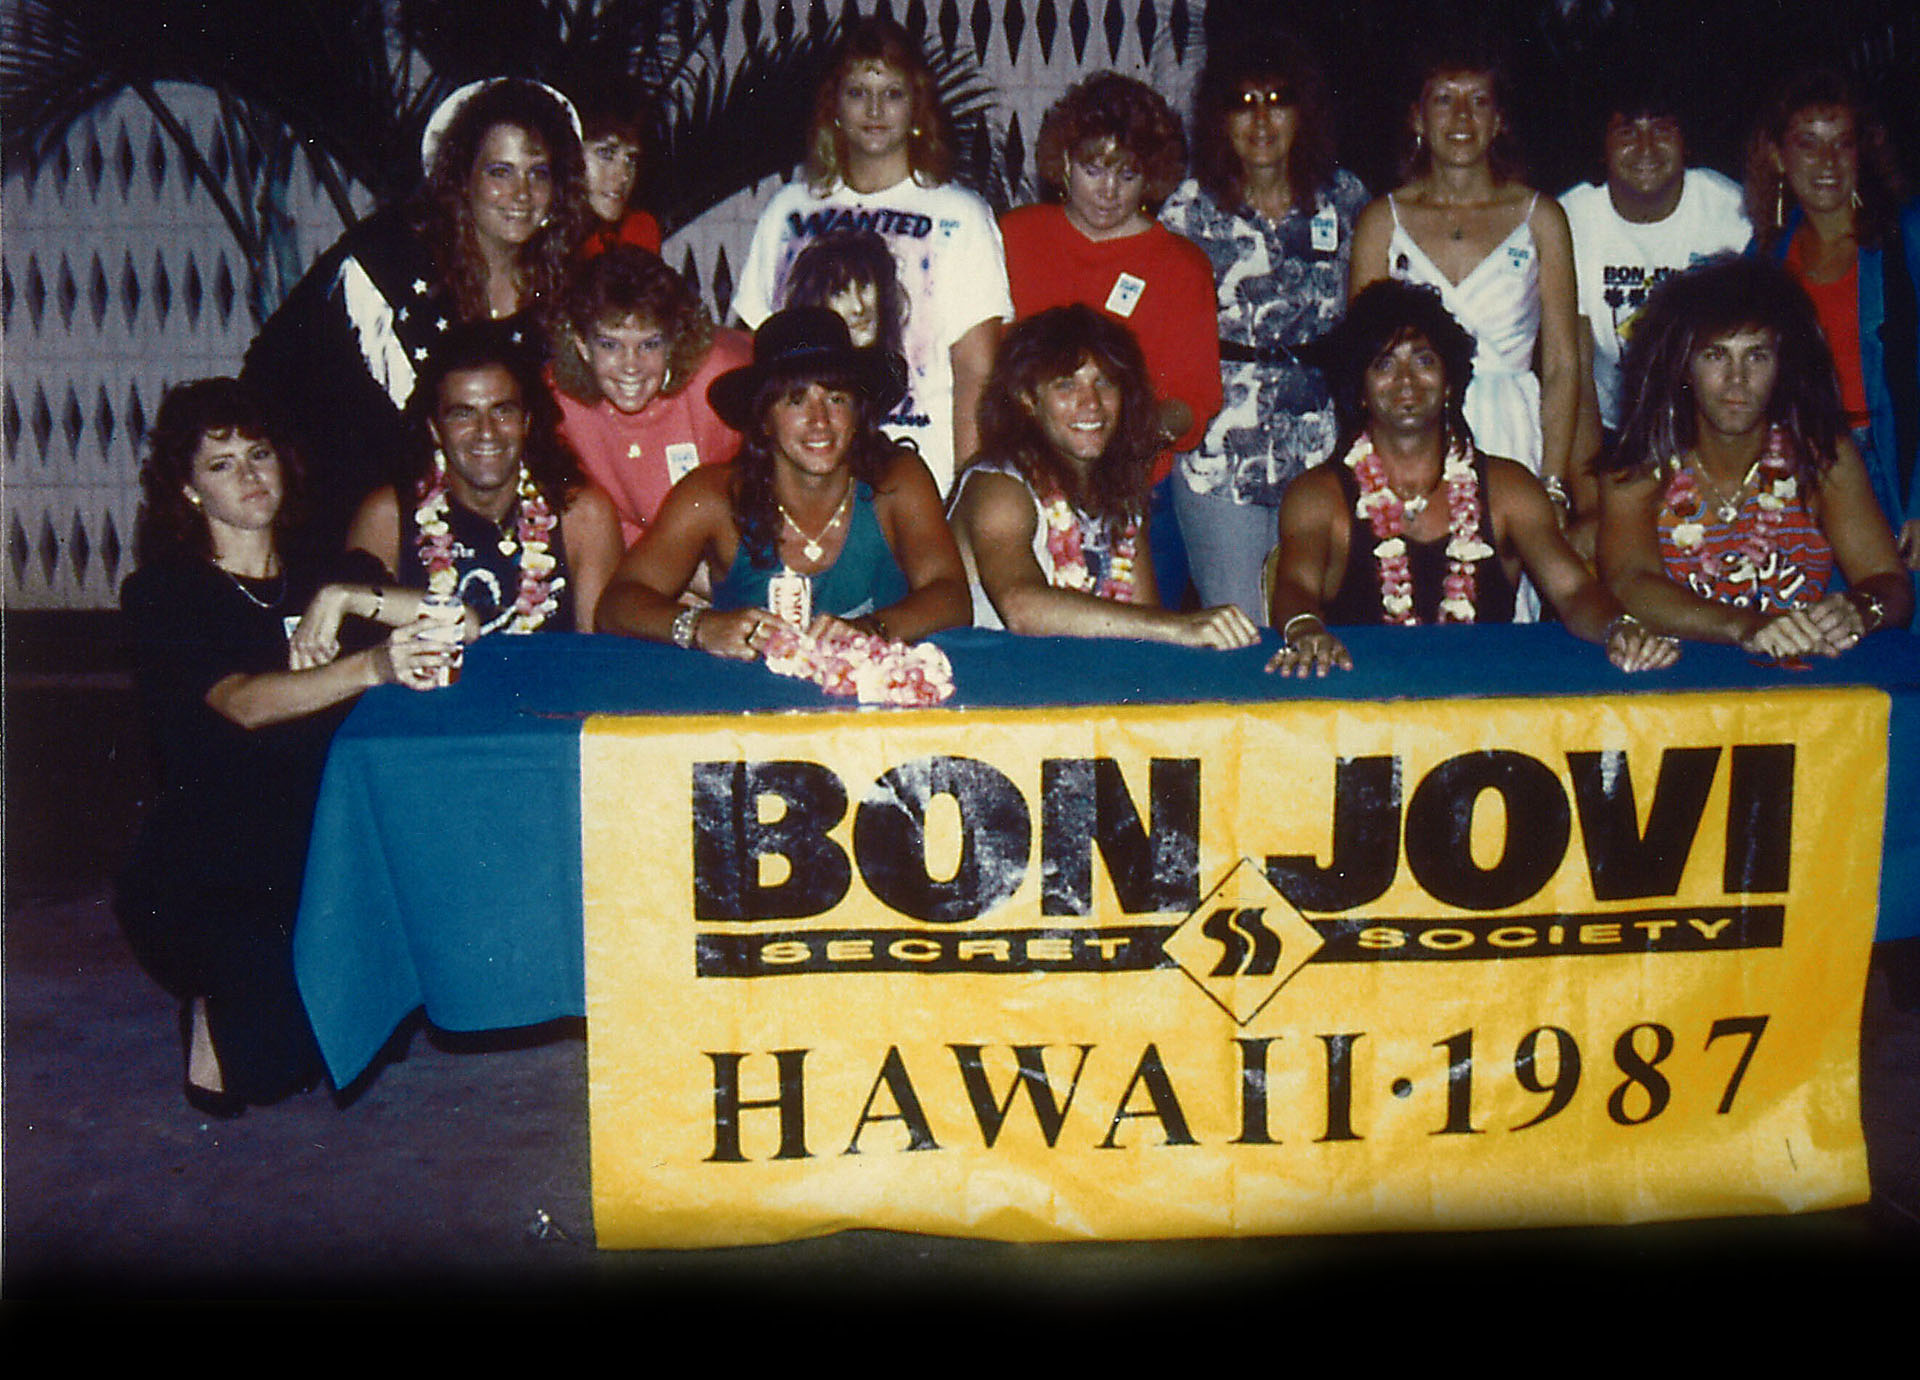 FAN CLUBS: 'Secret Society' & 'Backstage with Bon Jovi' - General BJ Discussion